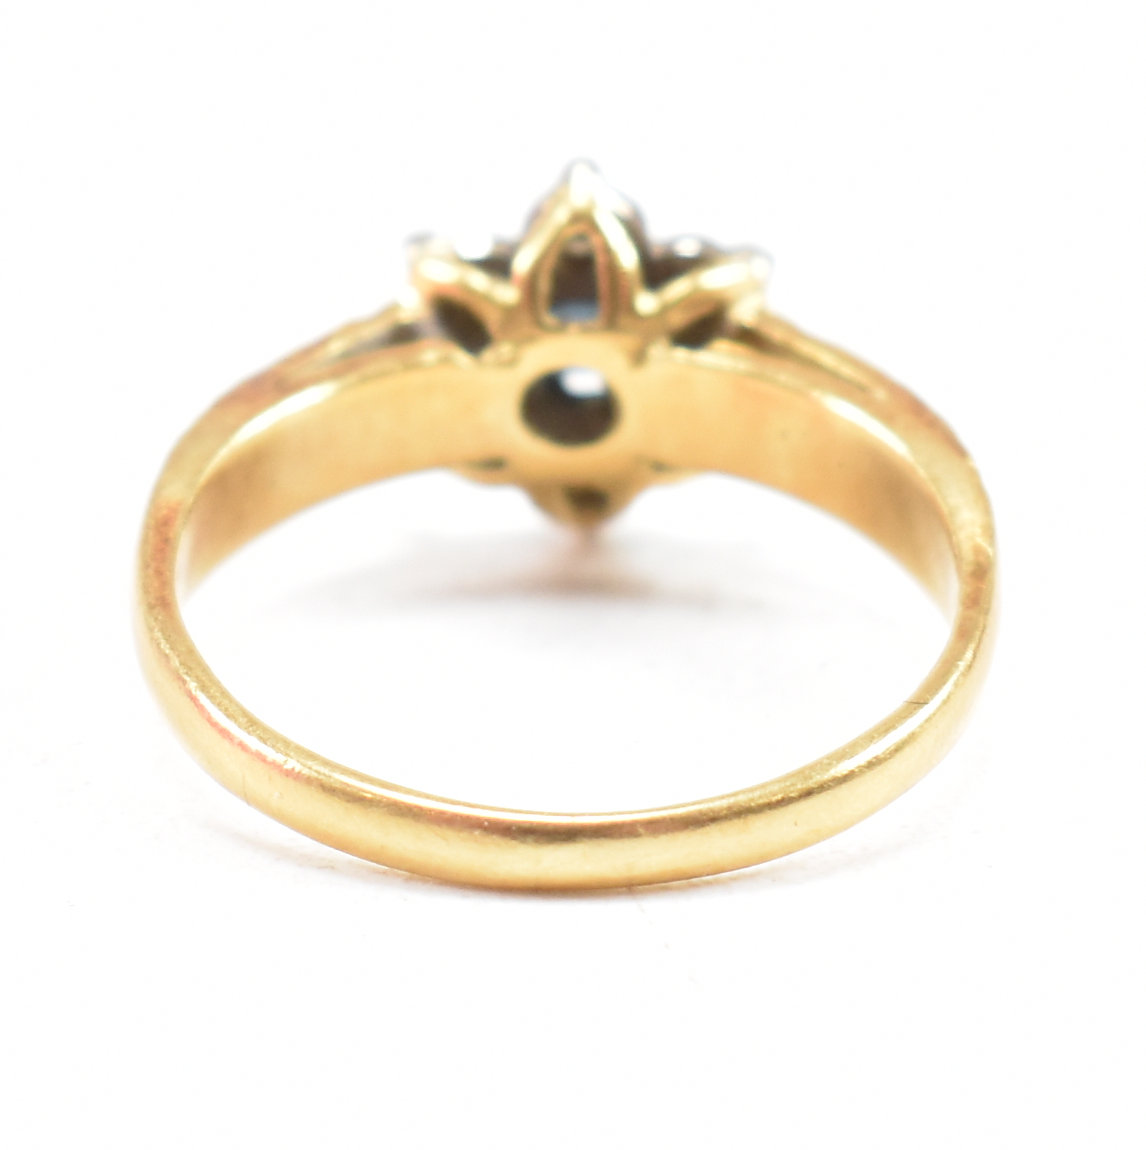 HALLMARKED 18CT GOLD SAPPHIRE CLUSTER RING - Image 5 of 9